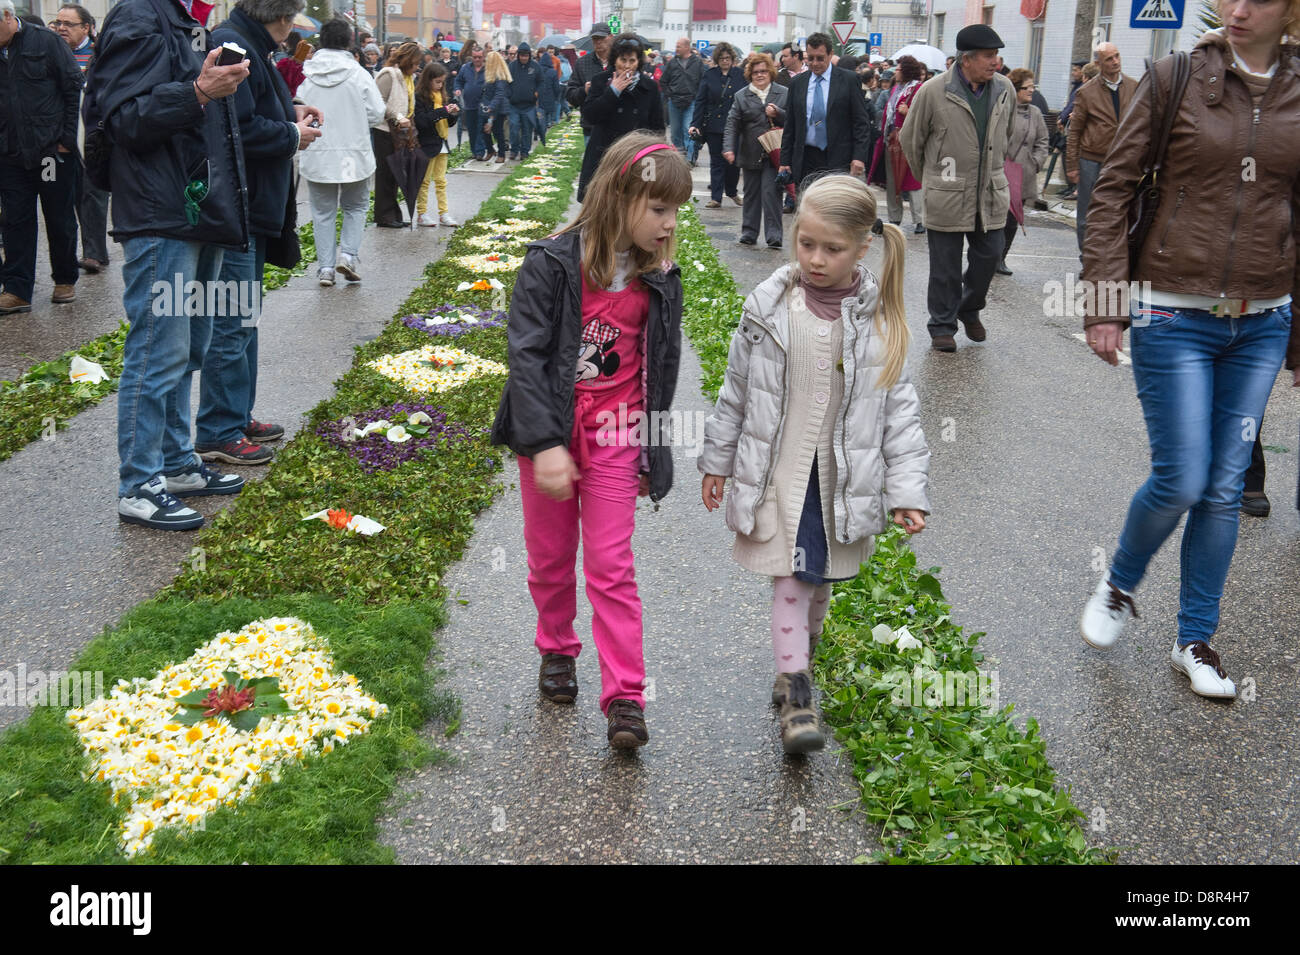 People walking on street decorated with wild flowers Easter Sunday Flower Torches Festival São Brás de Alportel Algarve Portugal Stock Photo